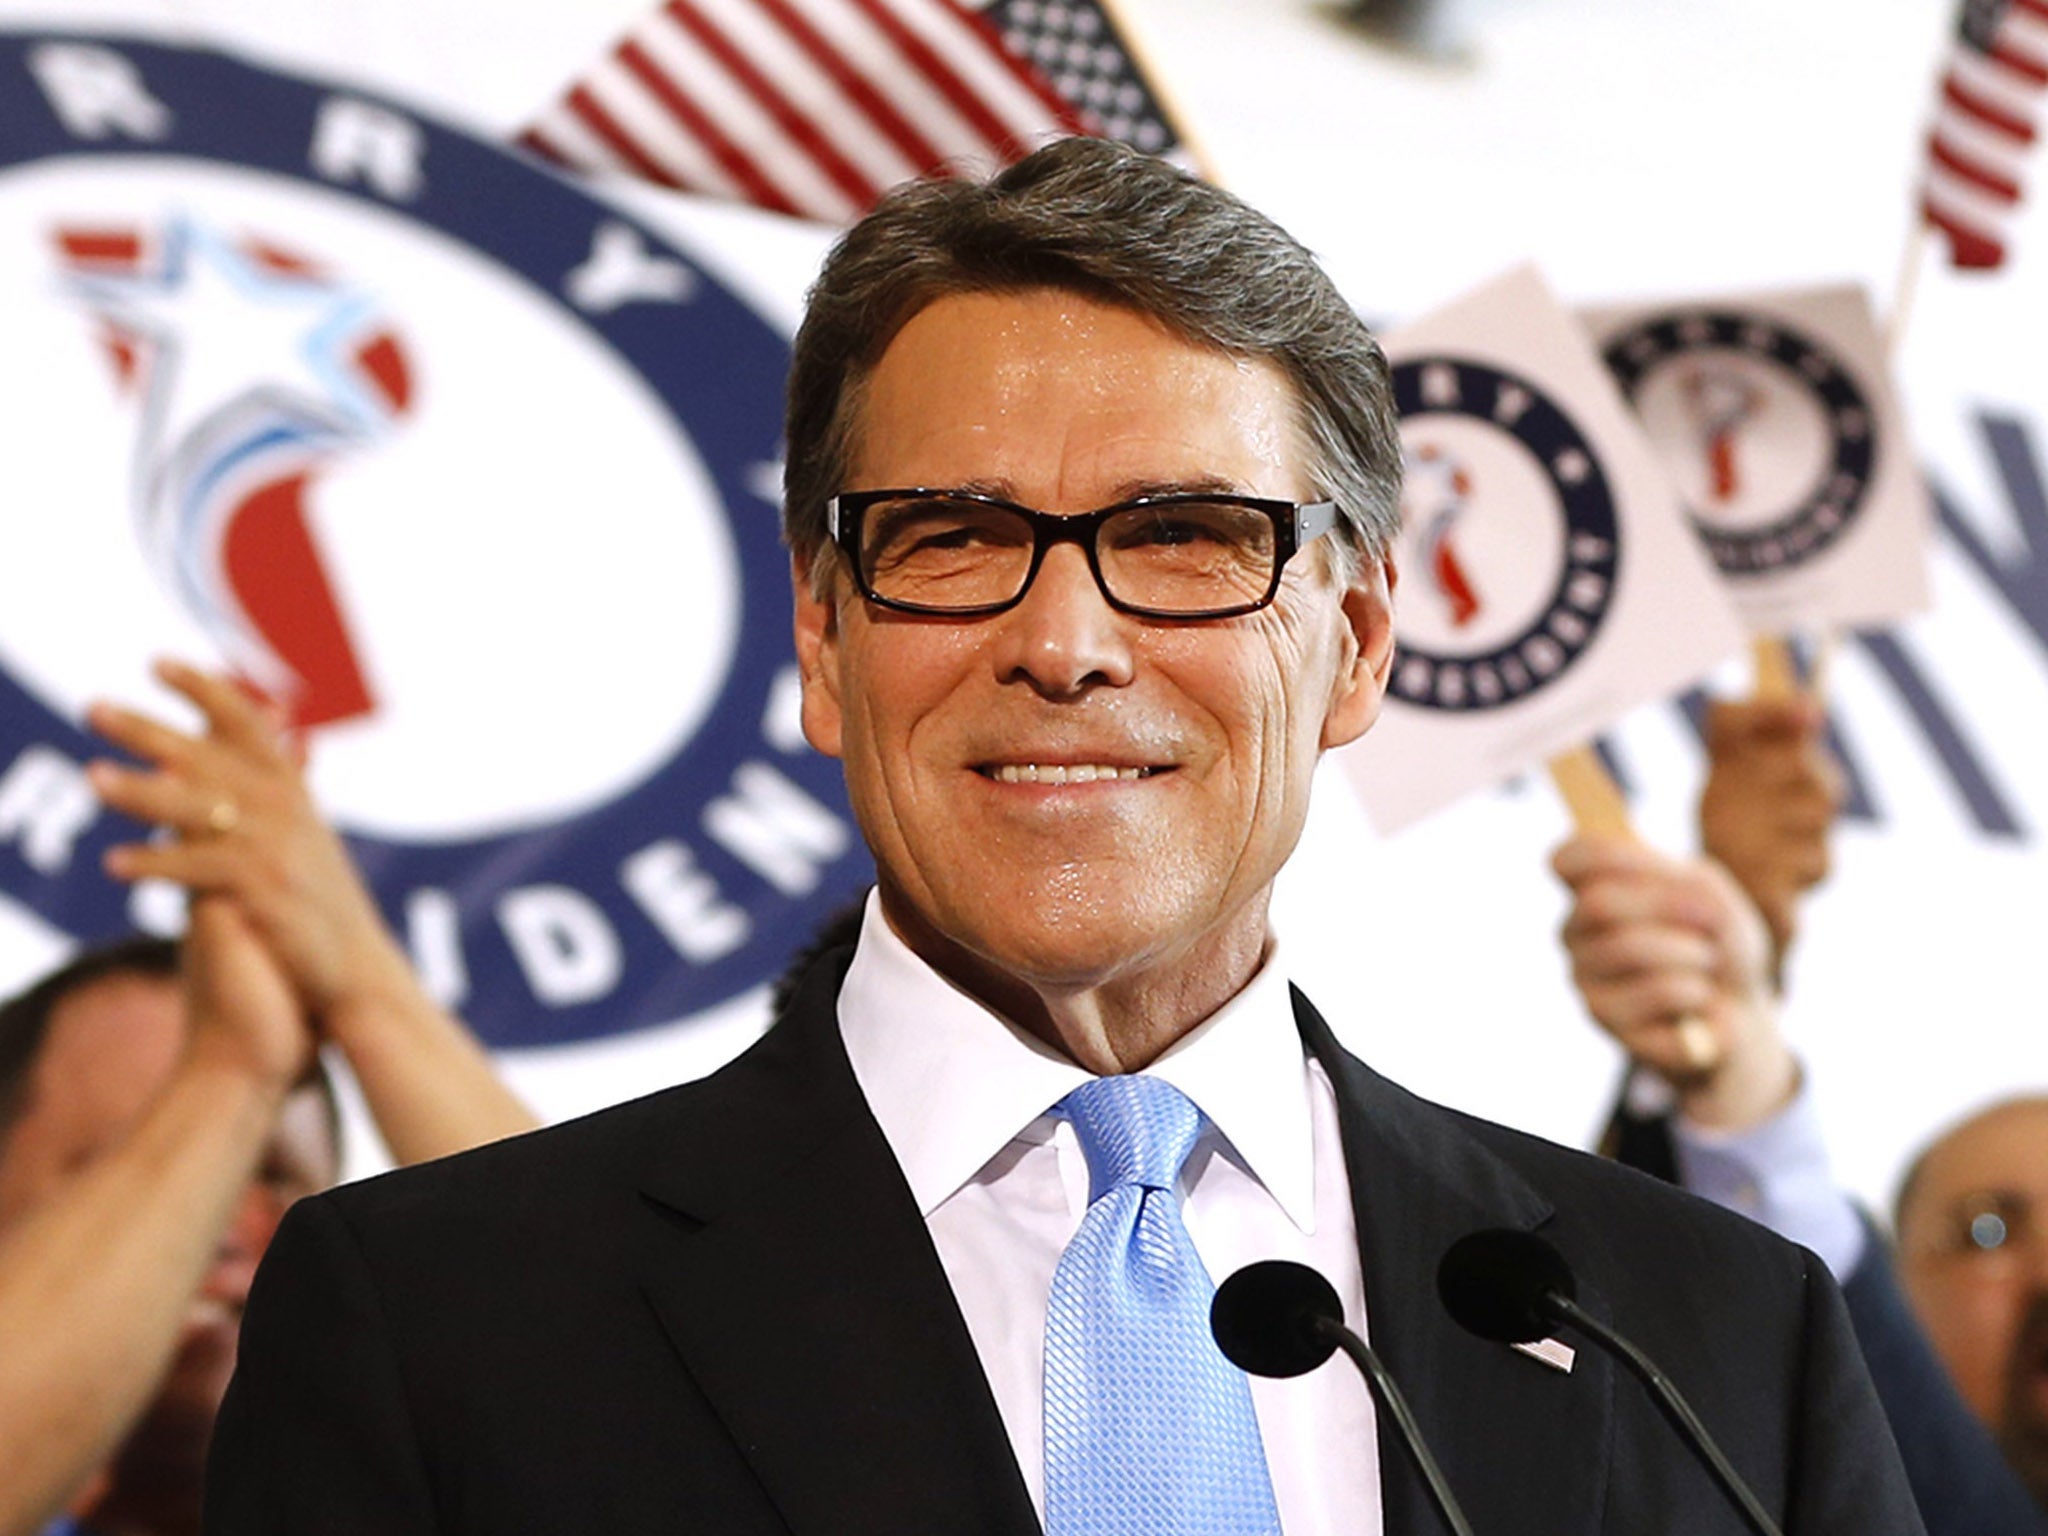 Former Texas Governor Rick Perry coined ‘the Texas Miracle’ term to describe the state’s economic strength